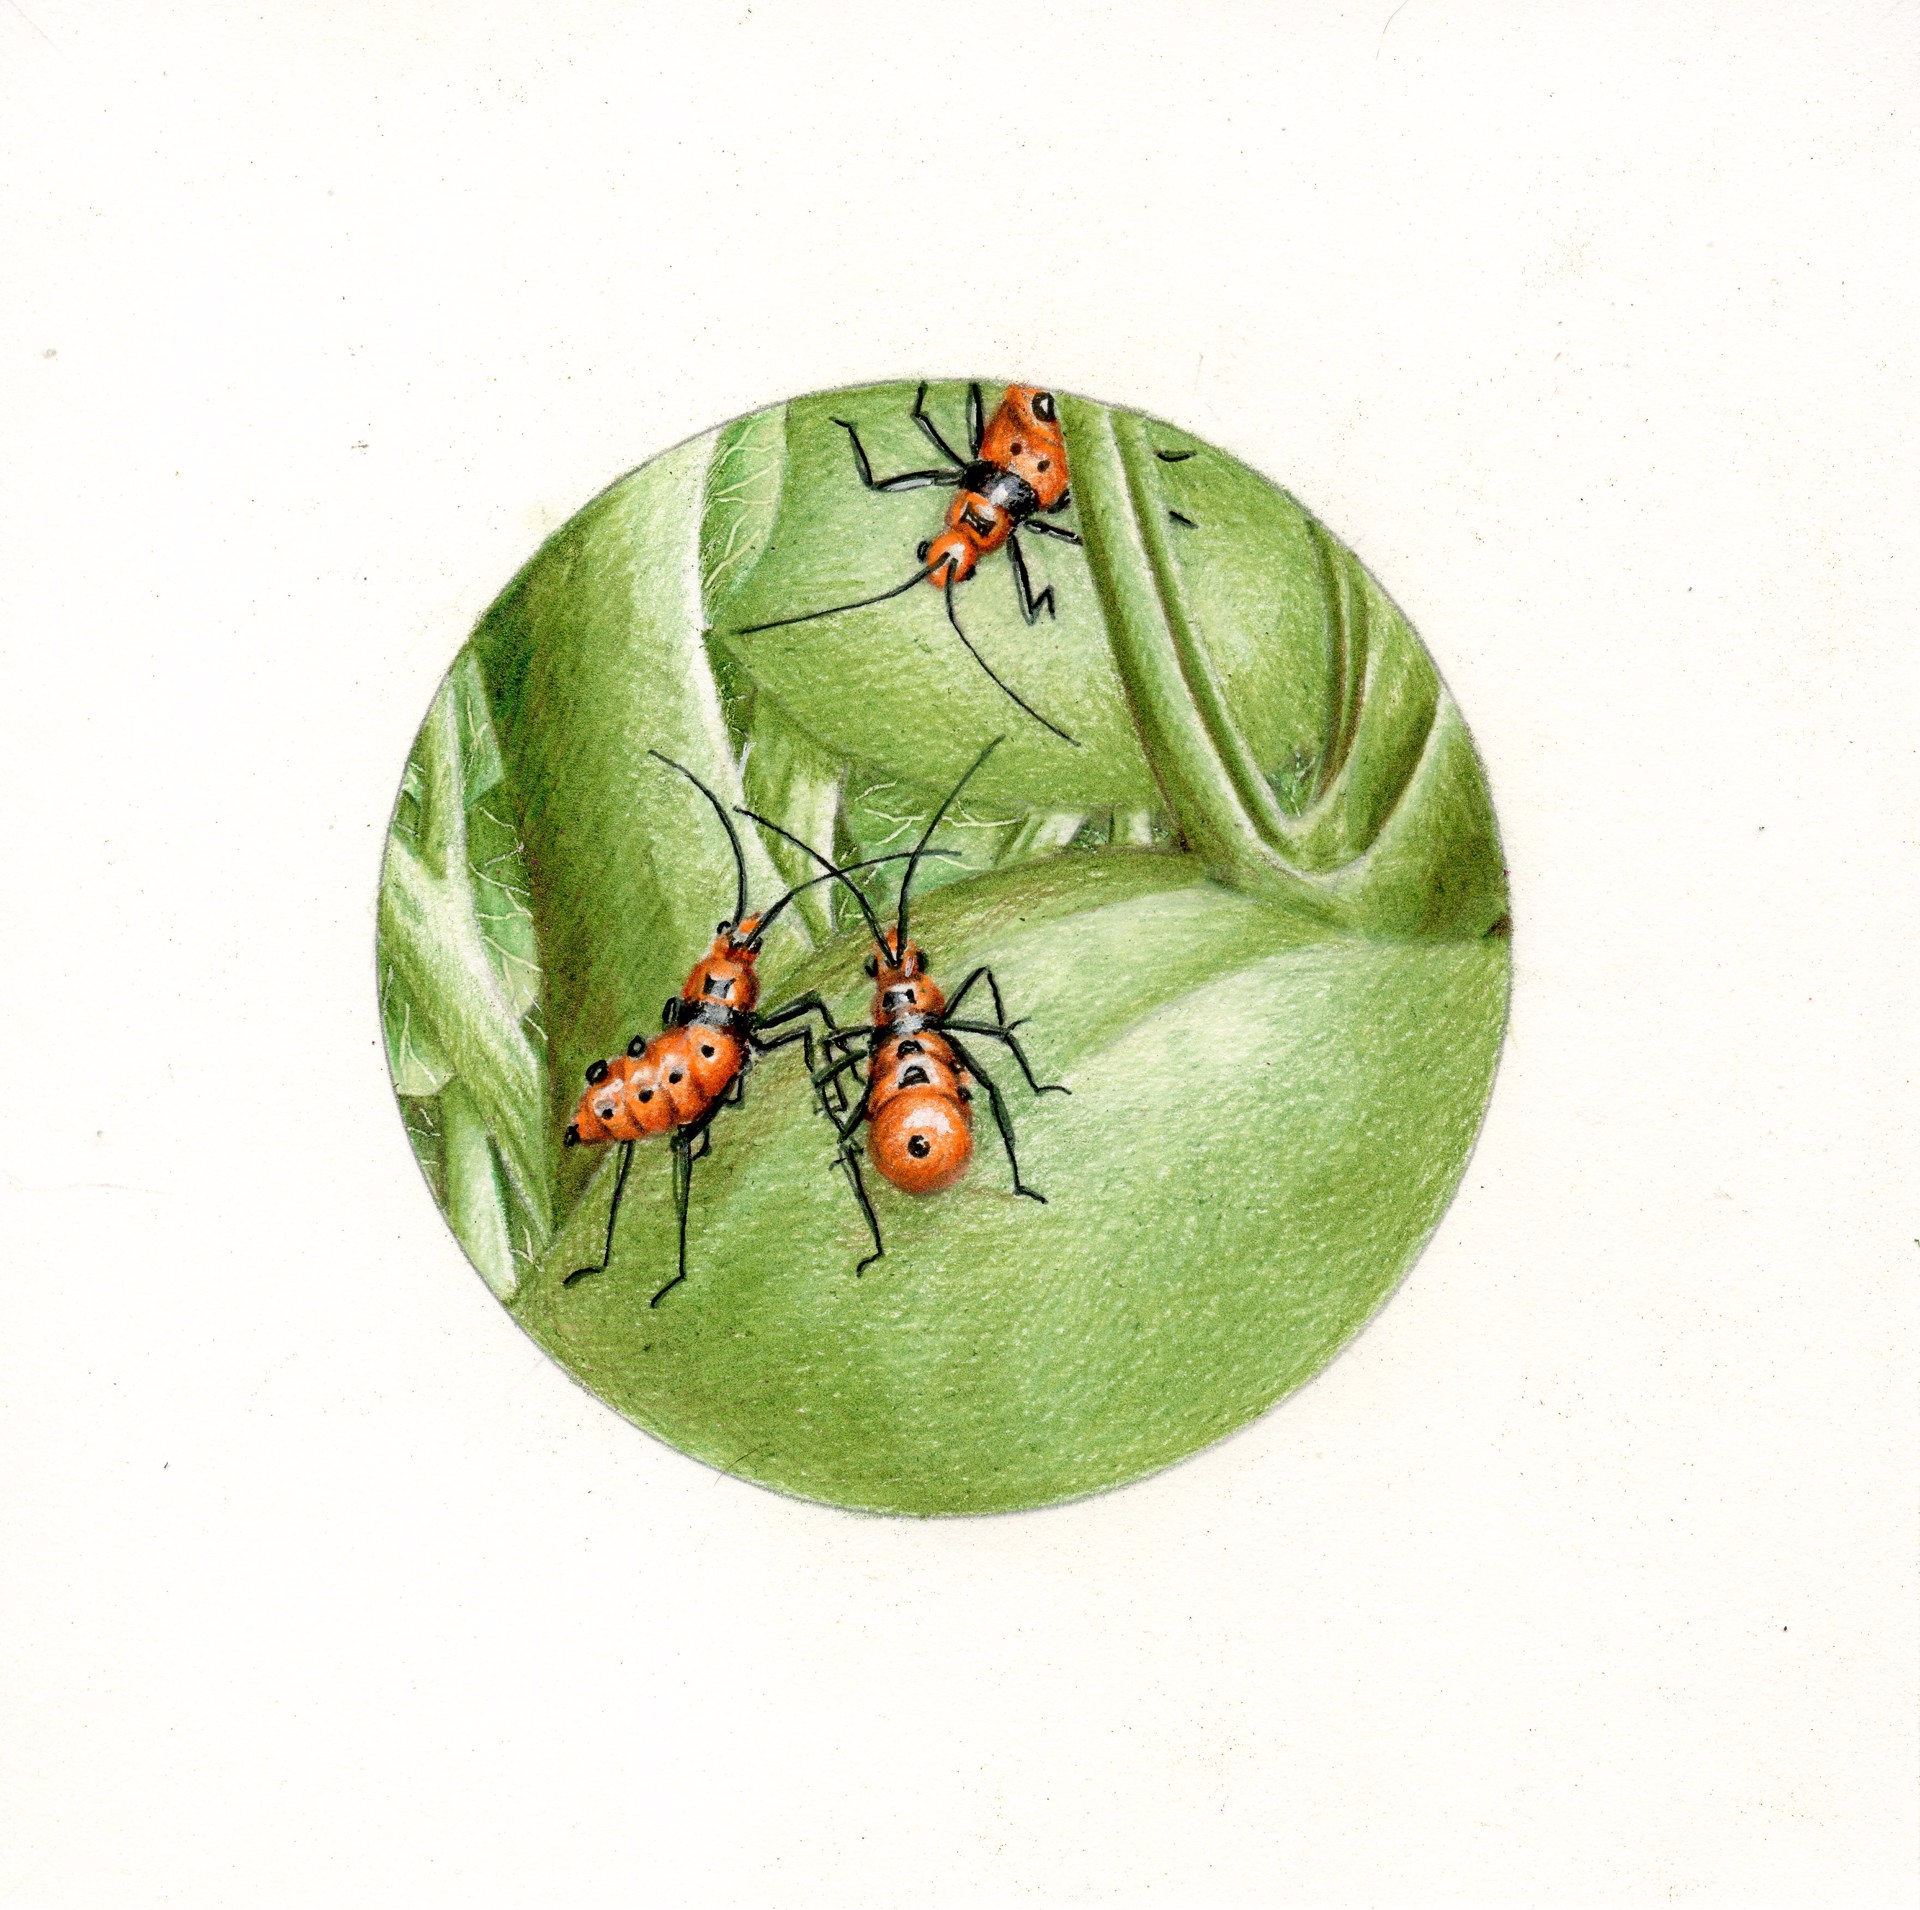 Leaf-footed Bug Nymphs by Mary Lee Eggart